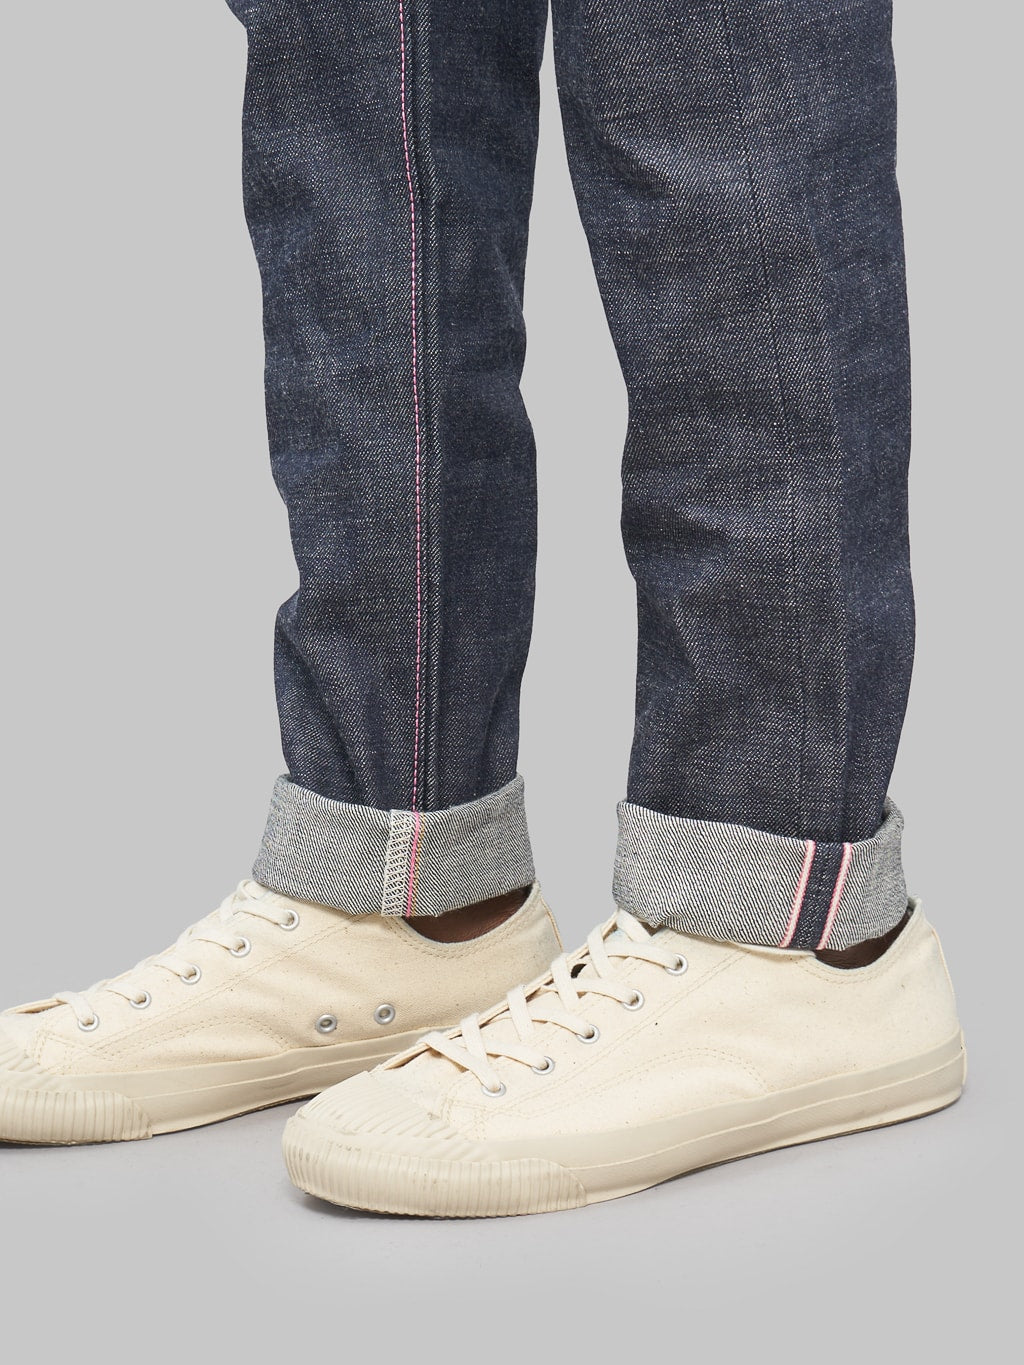 Momotaro legacy blue high tapered jeans pink selvedge line